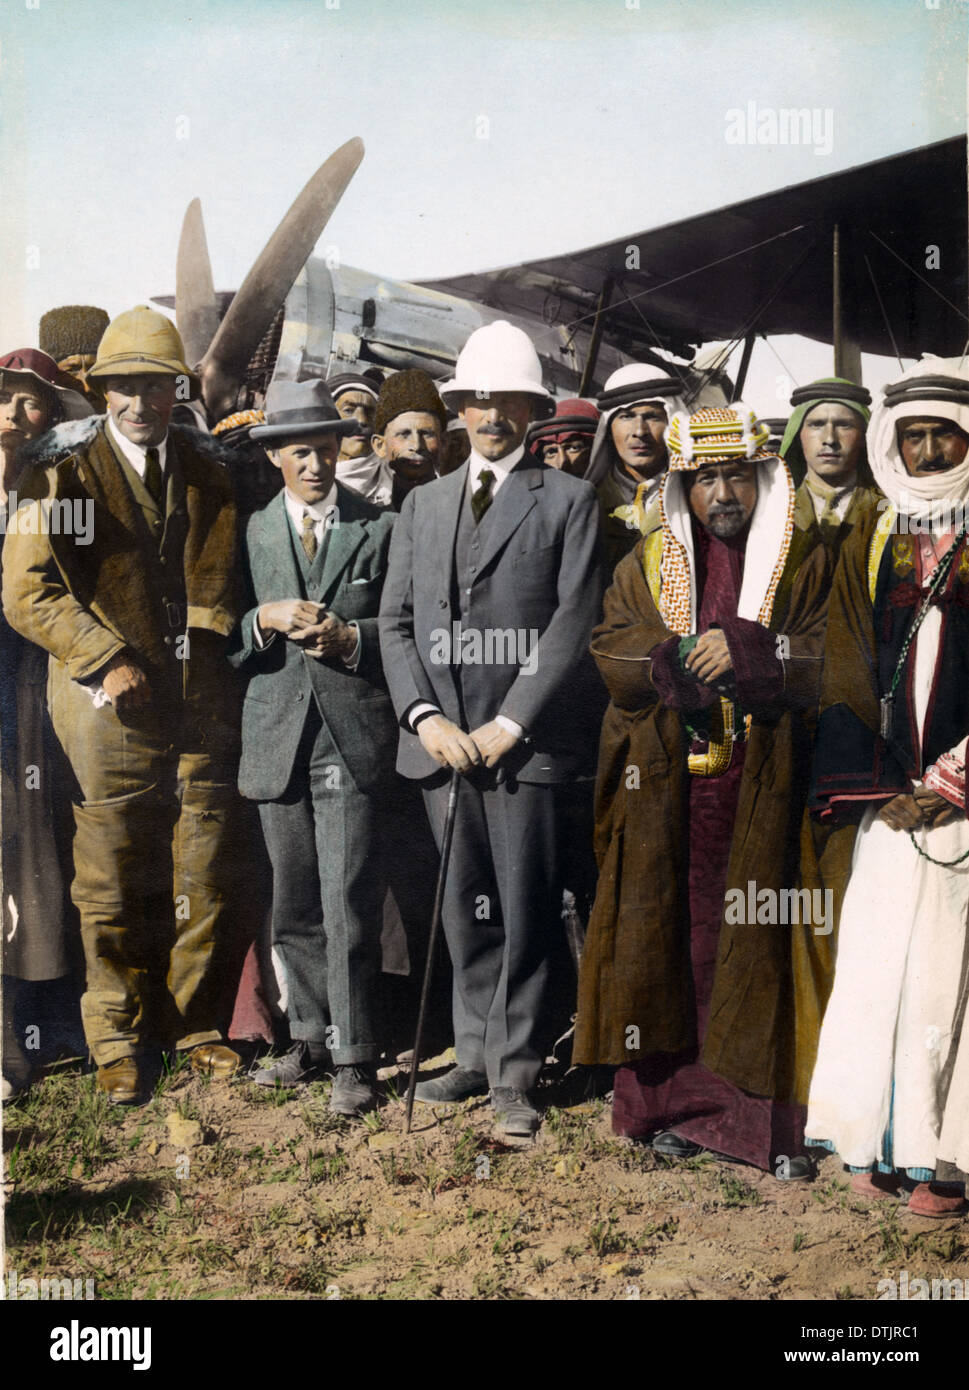 T.E.LAWRENCE (Lawrence of Arabia) at left in dark hat at Amman Airport in April 1921 - see Description below Stock Photo